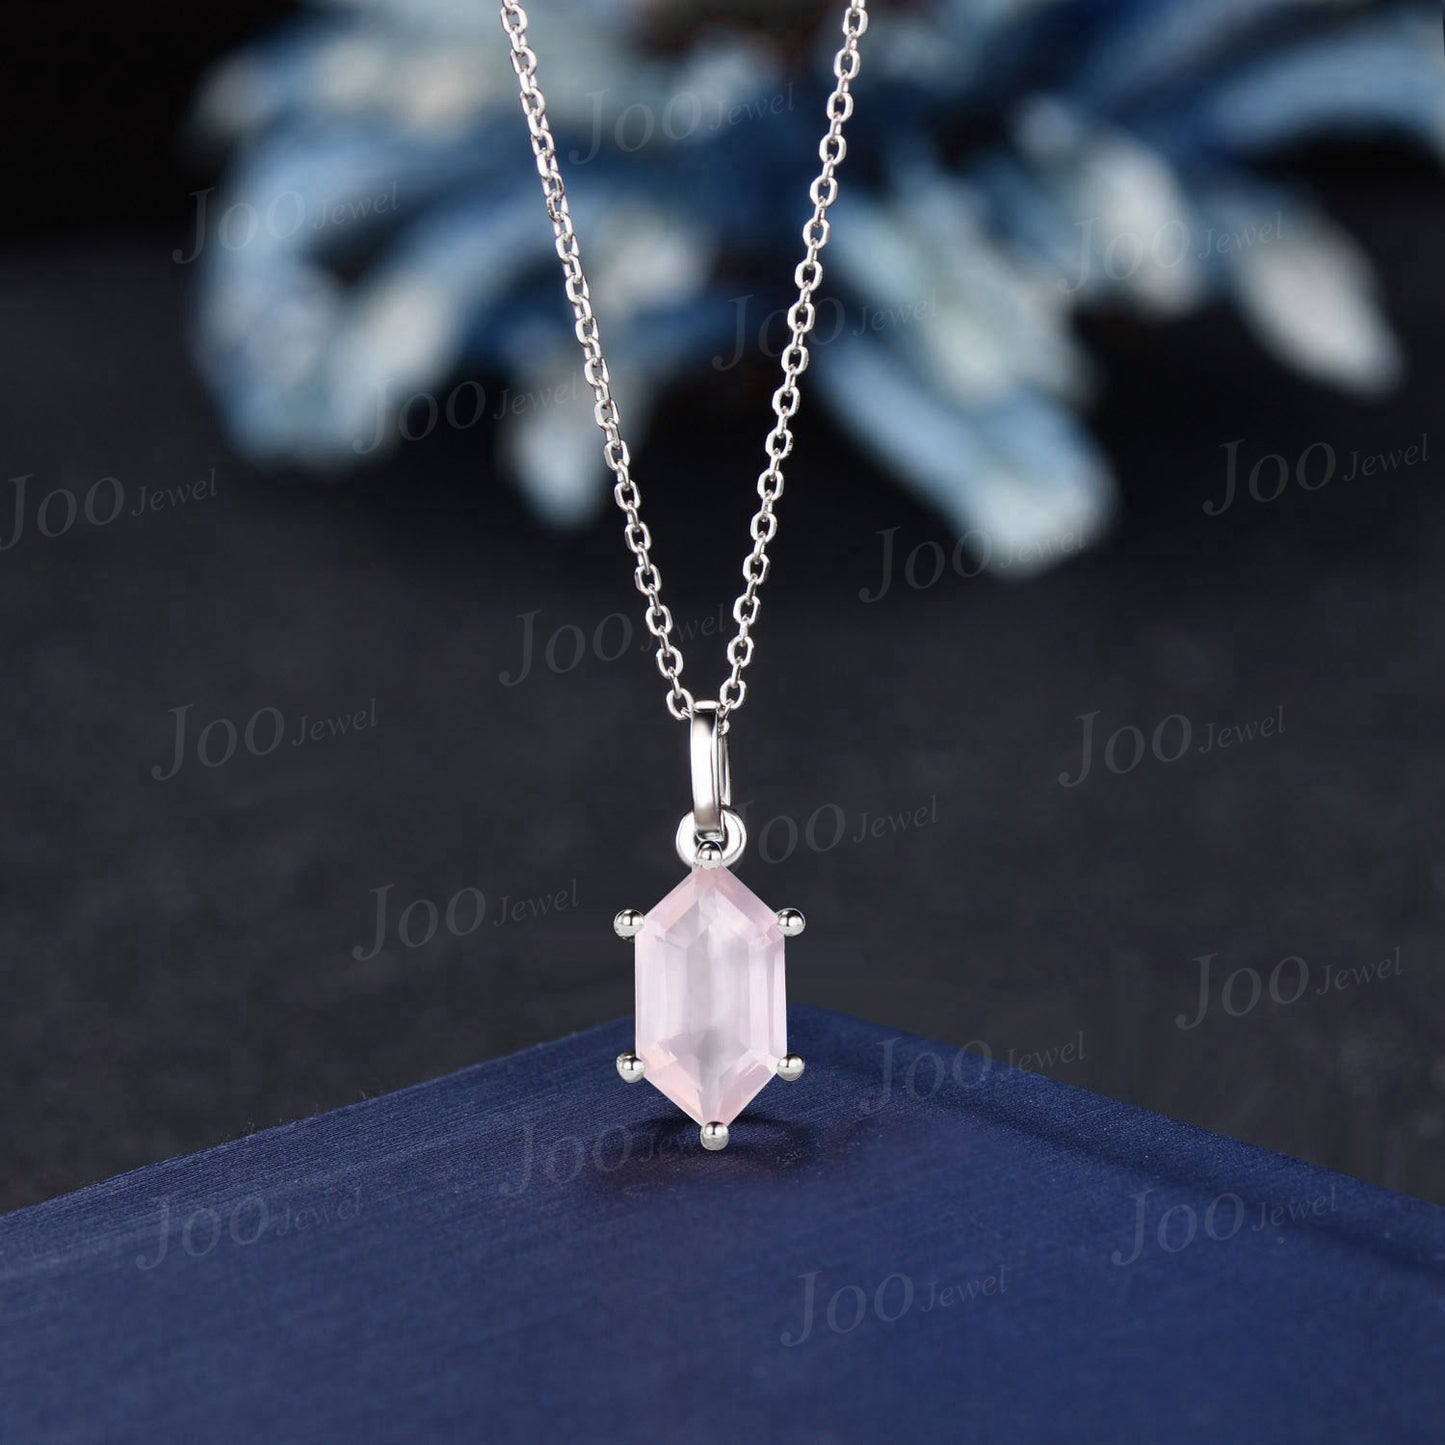 Long Hexagon Cut Natural Rose Quartz Stone Necklace Sterling Silver Healing Crystal Pendant Pink Gemstone Jewelry Birthday Gifts For Women